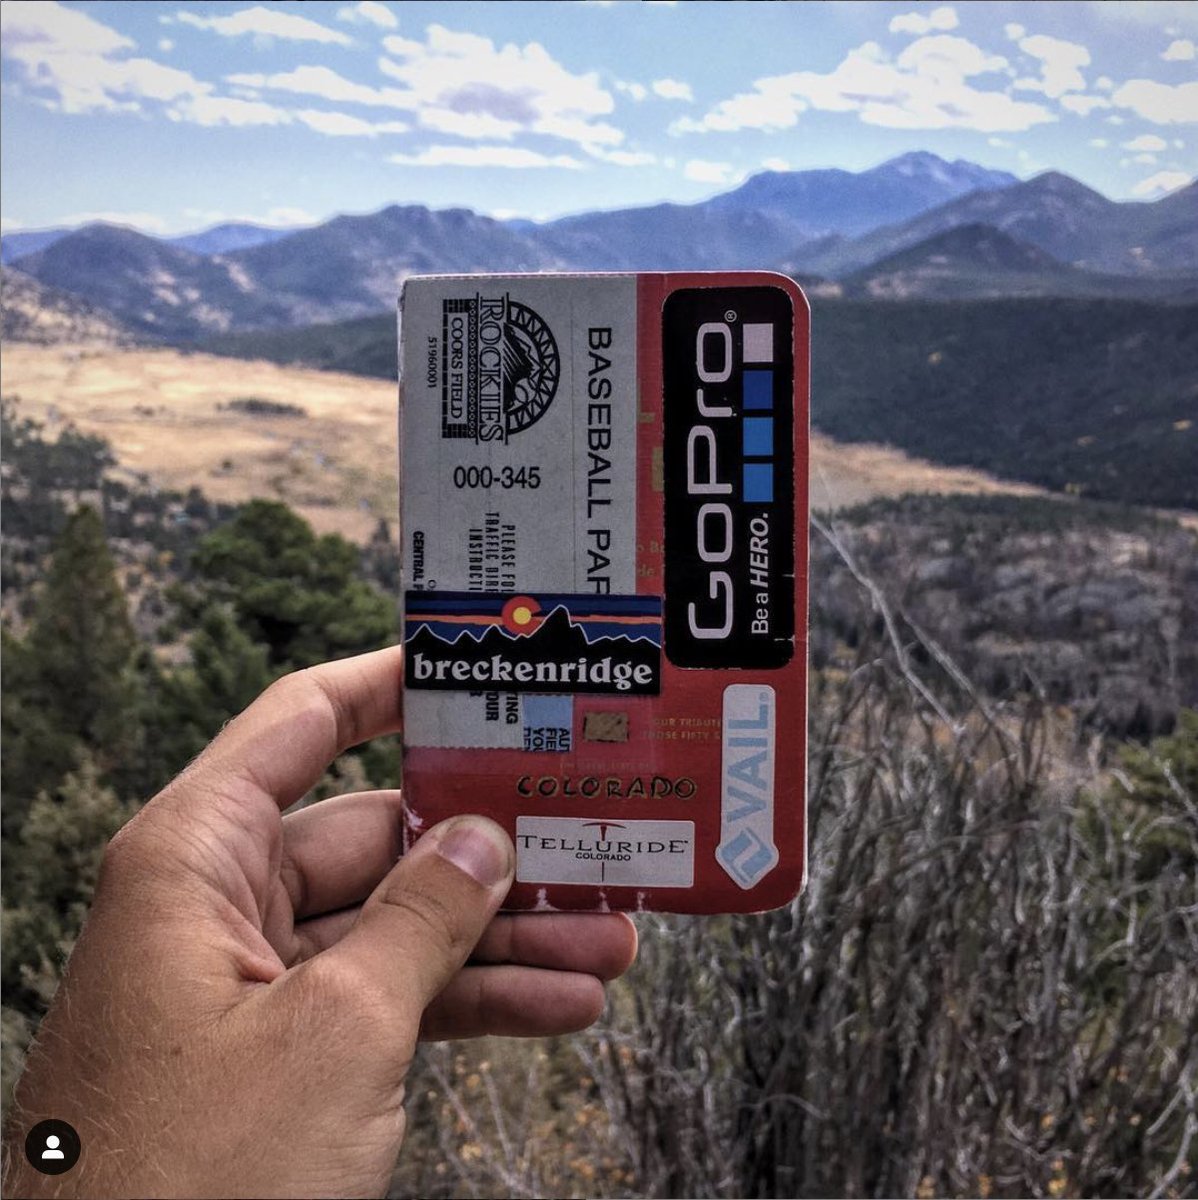 Another three parks in Colorado -  @VisitMesaVerde,  #greatsanddunesnationalpark, and  @RockyNPS, which my friend Nate joined me for. Here's my CO  @FieldNotesBrand in RMNP.